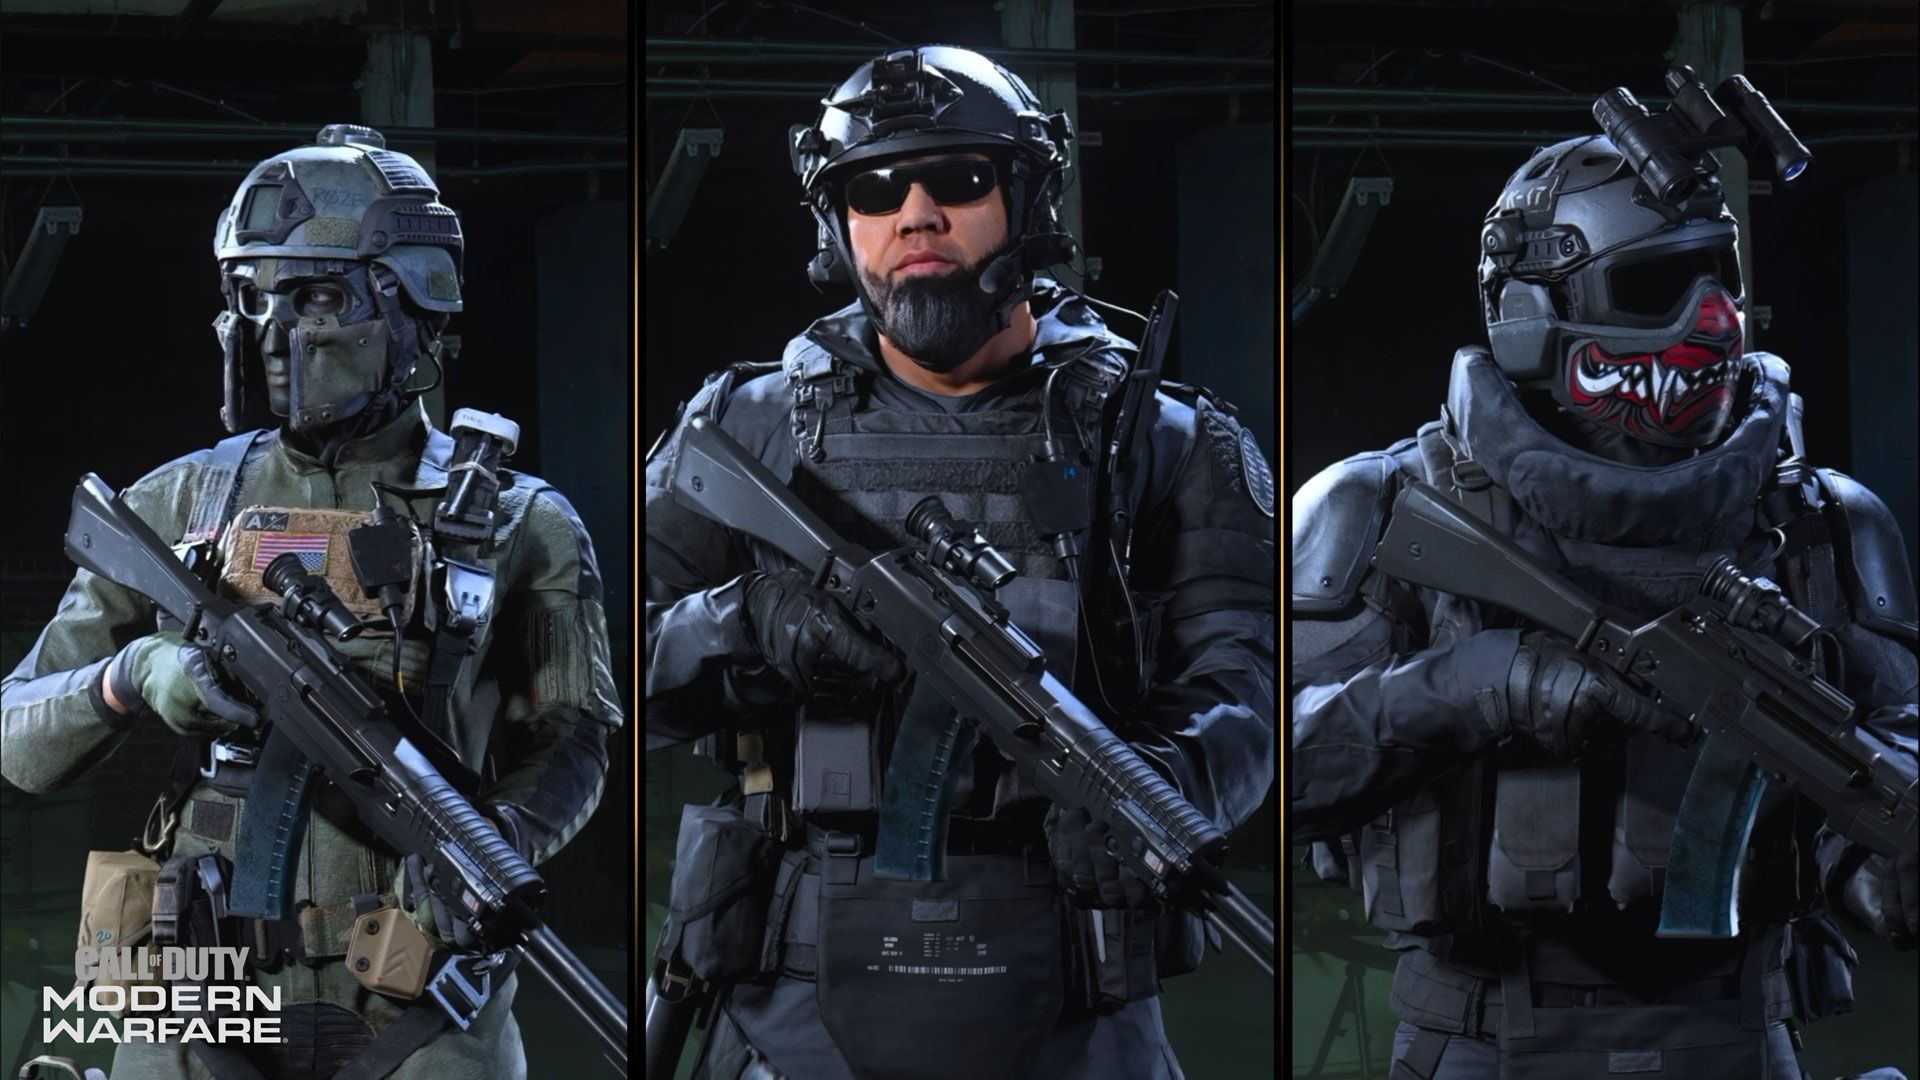 The Rise of Shadow Company in Call of Duty: Modern Warfare. Modern warfare, Call of duty, New shadow